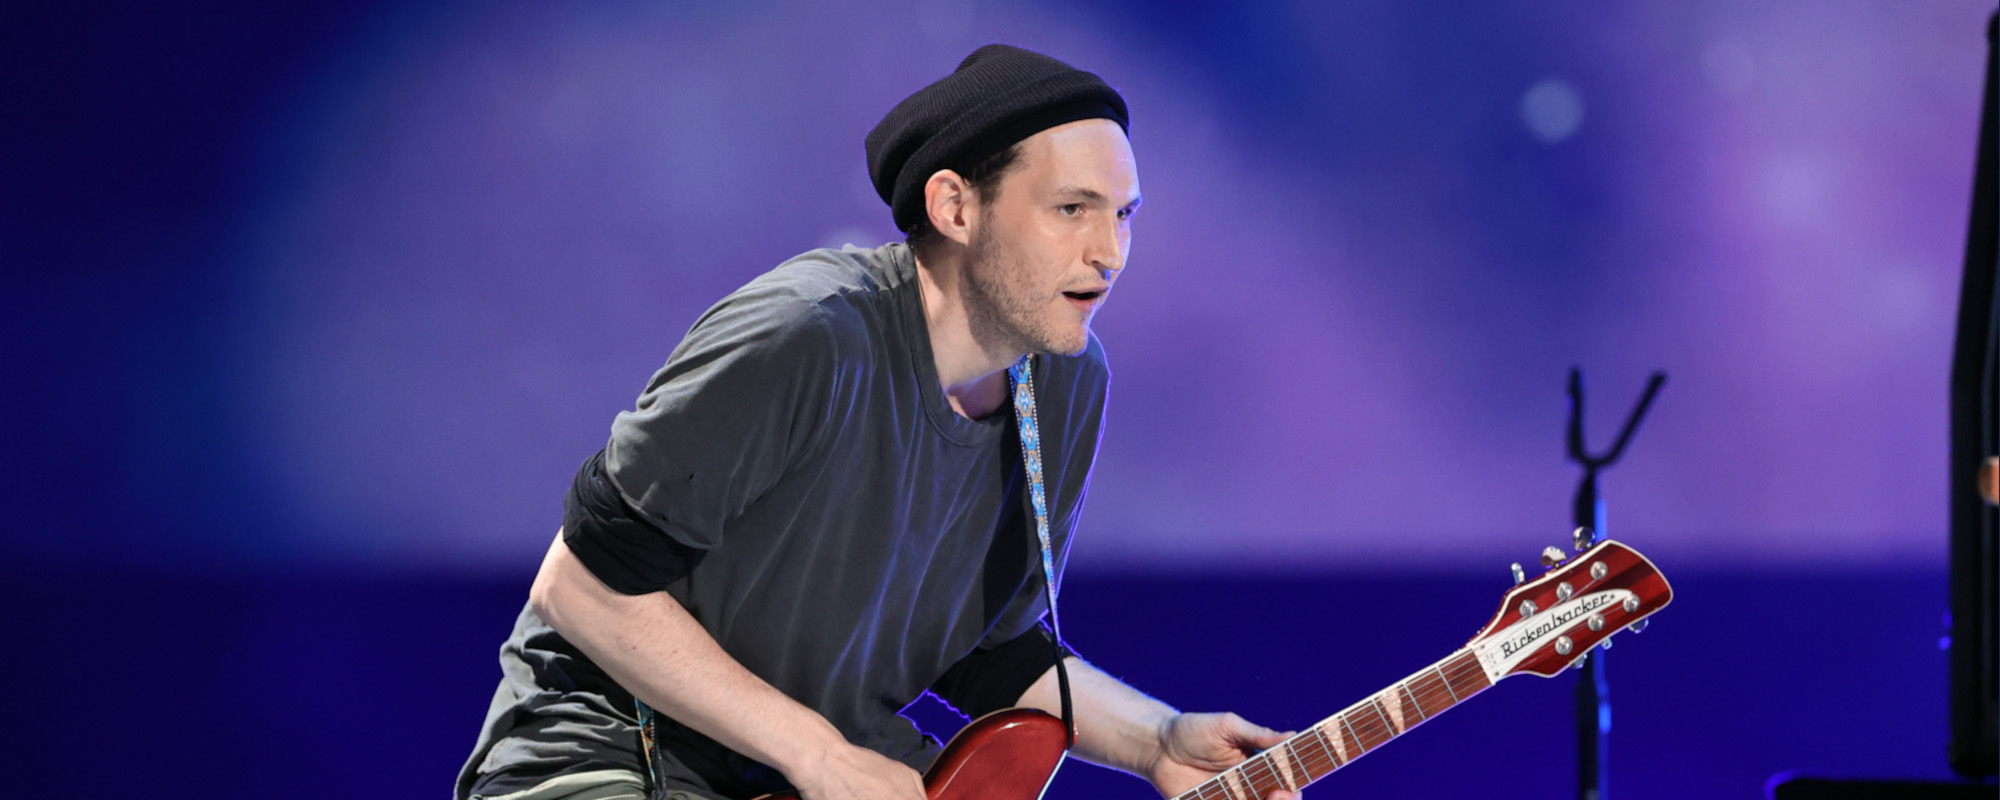 “Rick Rubin Was Way More a Hindrance Than a Help” with Red Hot Chili Peppers says Josh Klinghoffer